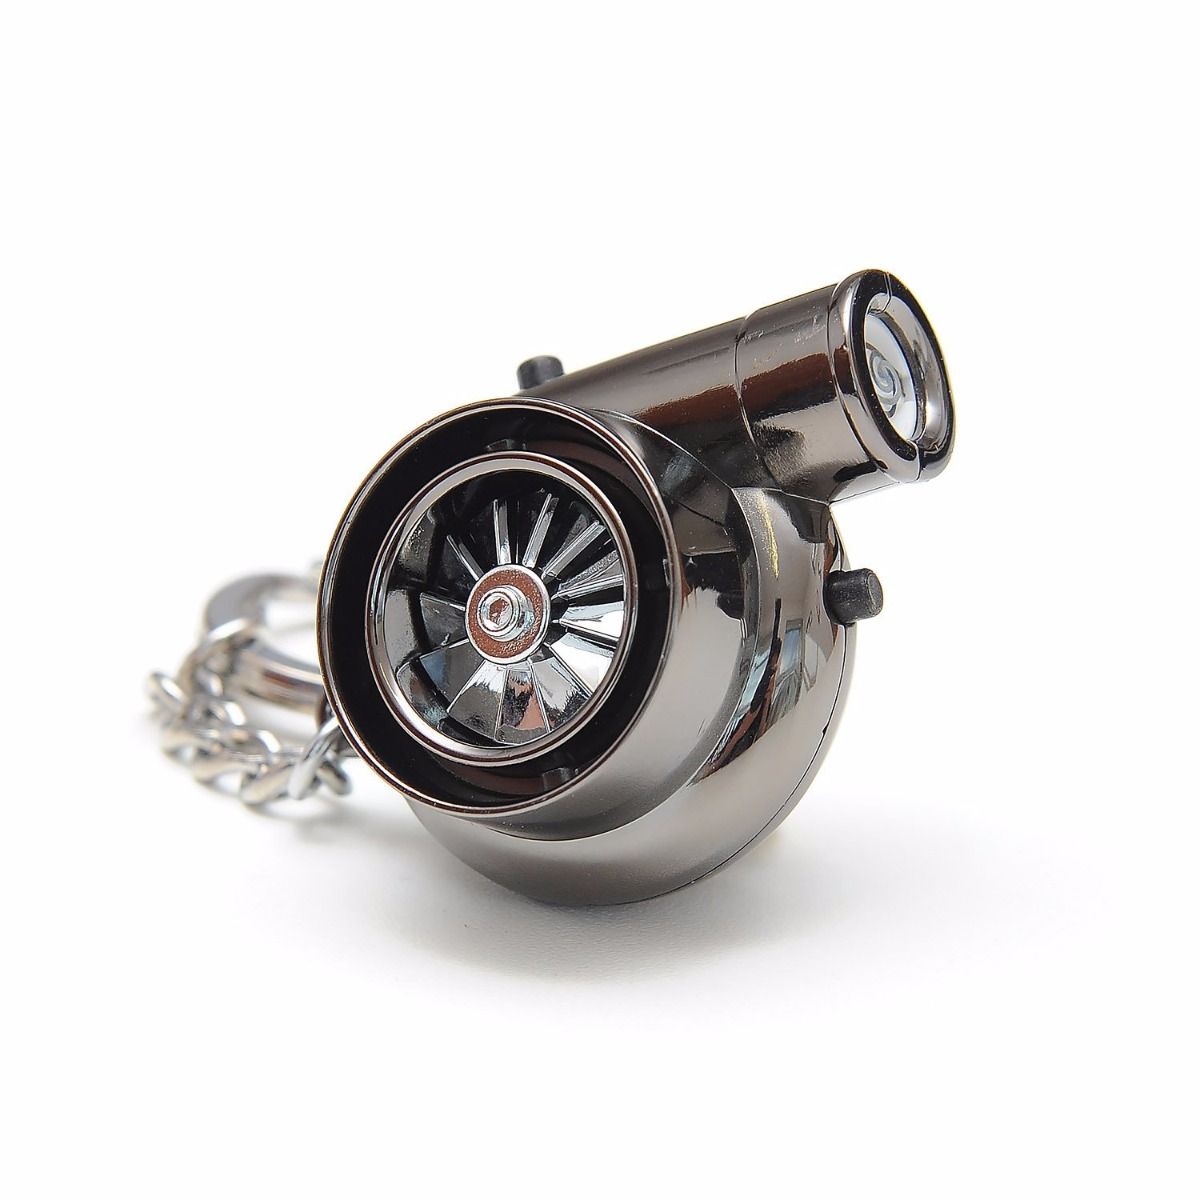 VmG-Store keychain in a form of an electric turbo charger, with